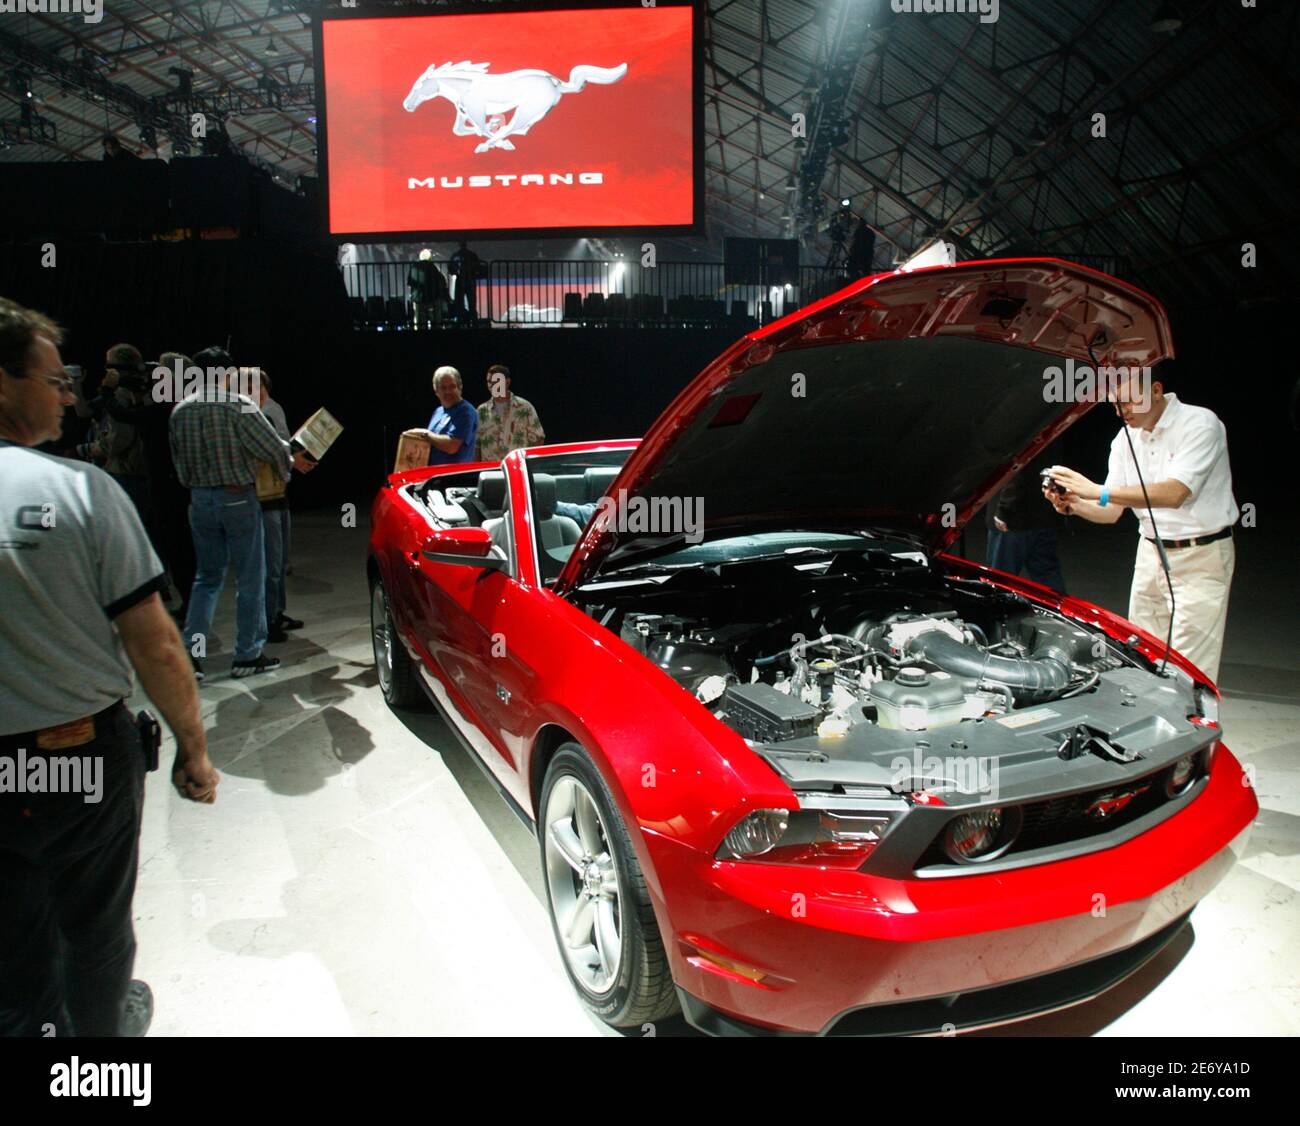 A car enthusiast takes a picture of Ford's 2010 Mustang at an unveiling in Santa Monica, California November 18, 2008. Ford Motor Co. unveiled a new version of its iconic Mustang sports car on Tuesday with an exterior that differs in every way from its predecessor, except for the roof panel.  REUTERS/Fred Prouser      (UNITED STATES) Stock Photo